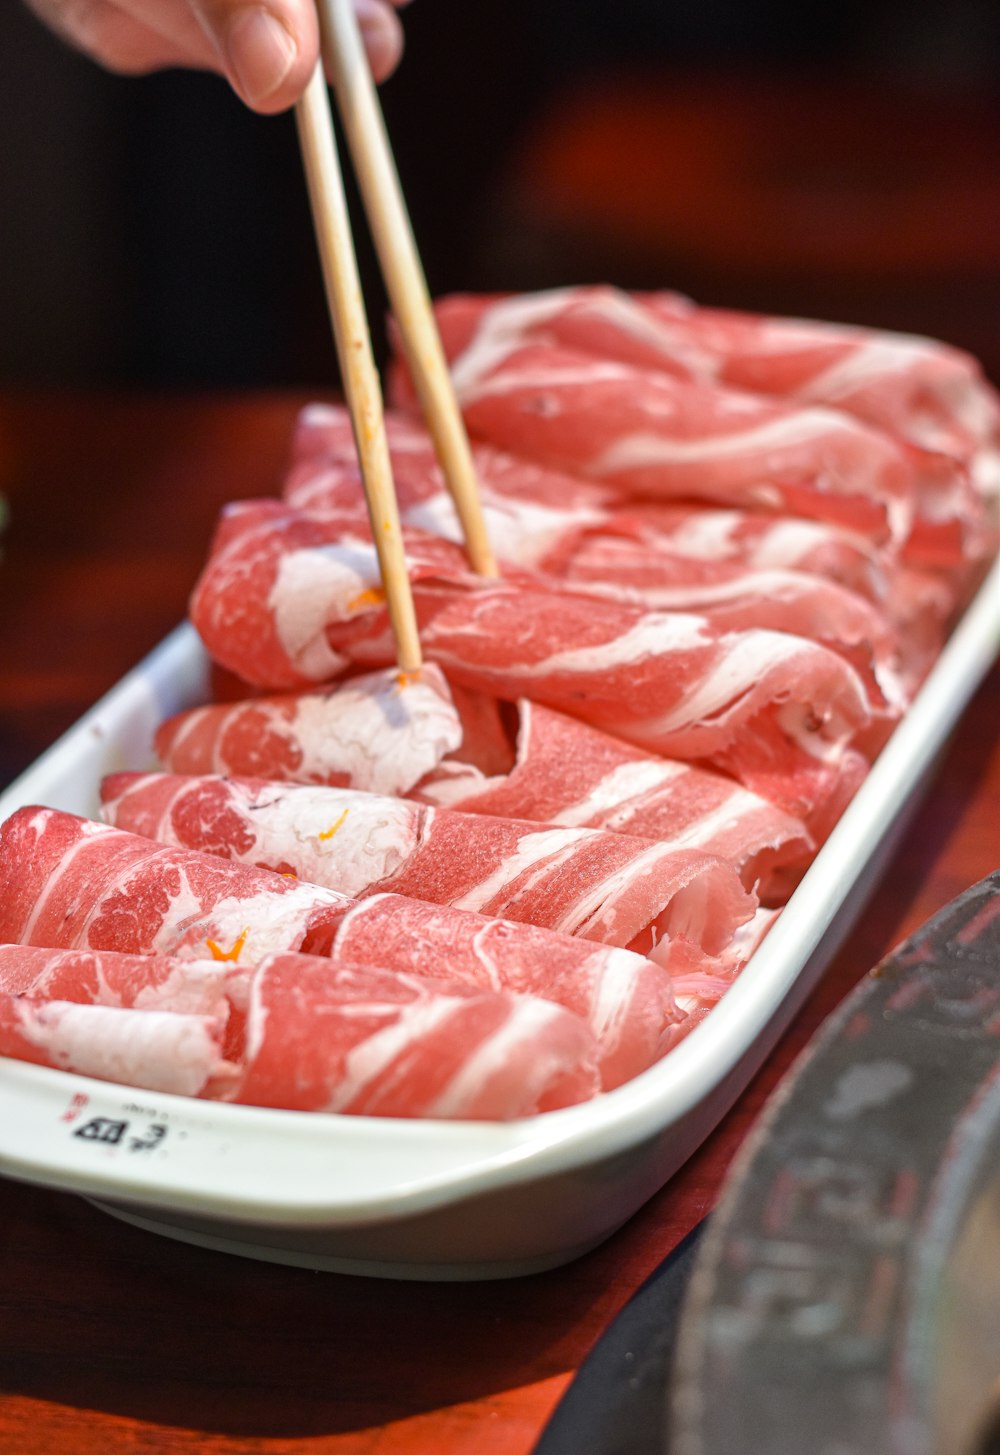 a person holding chopsticks over a tray of raw meat